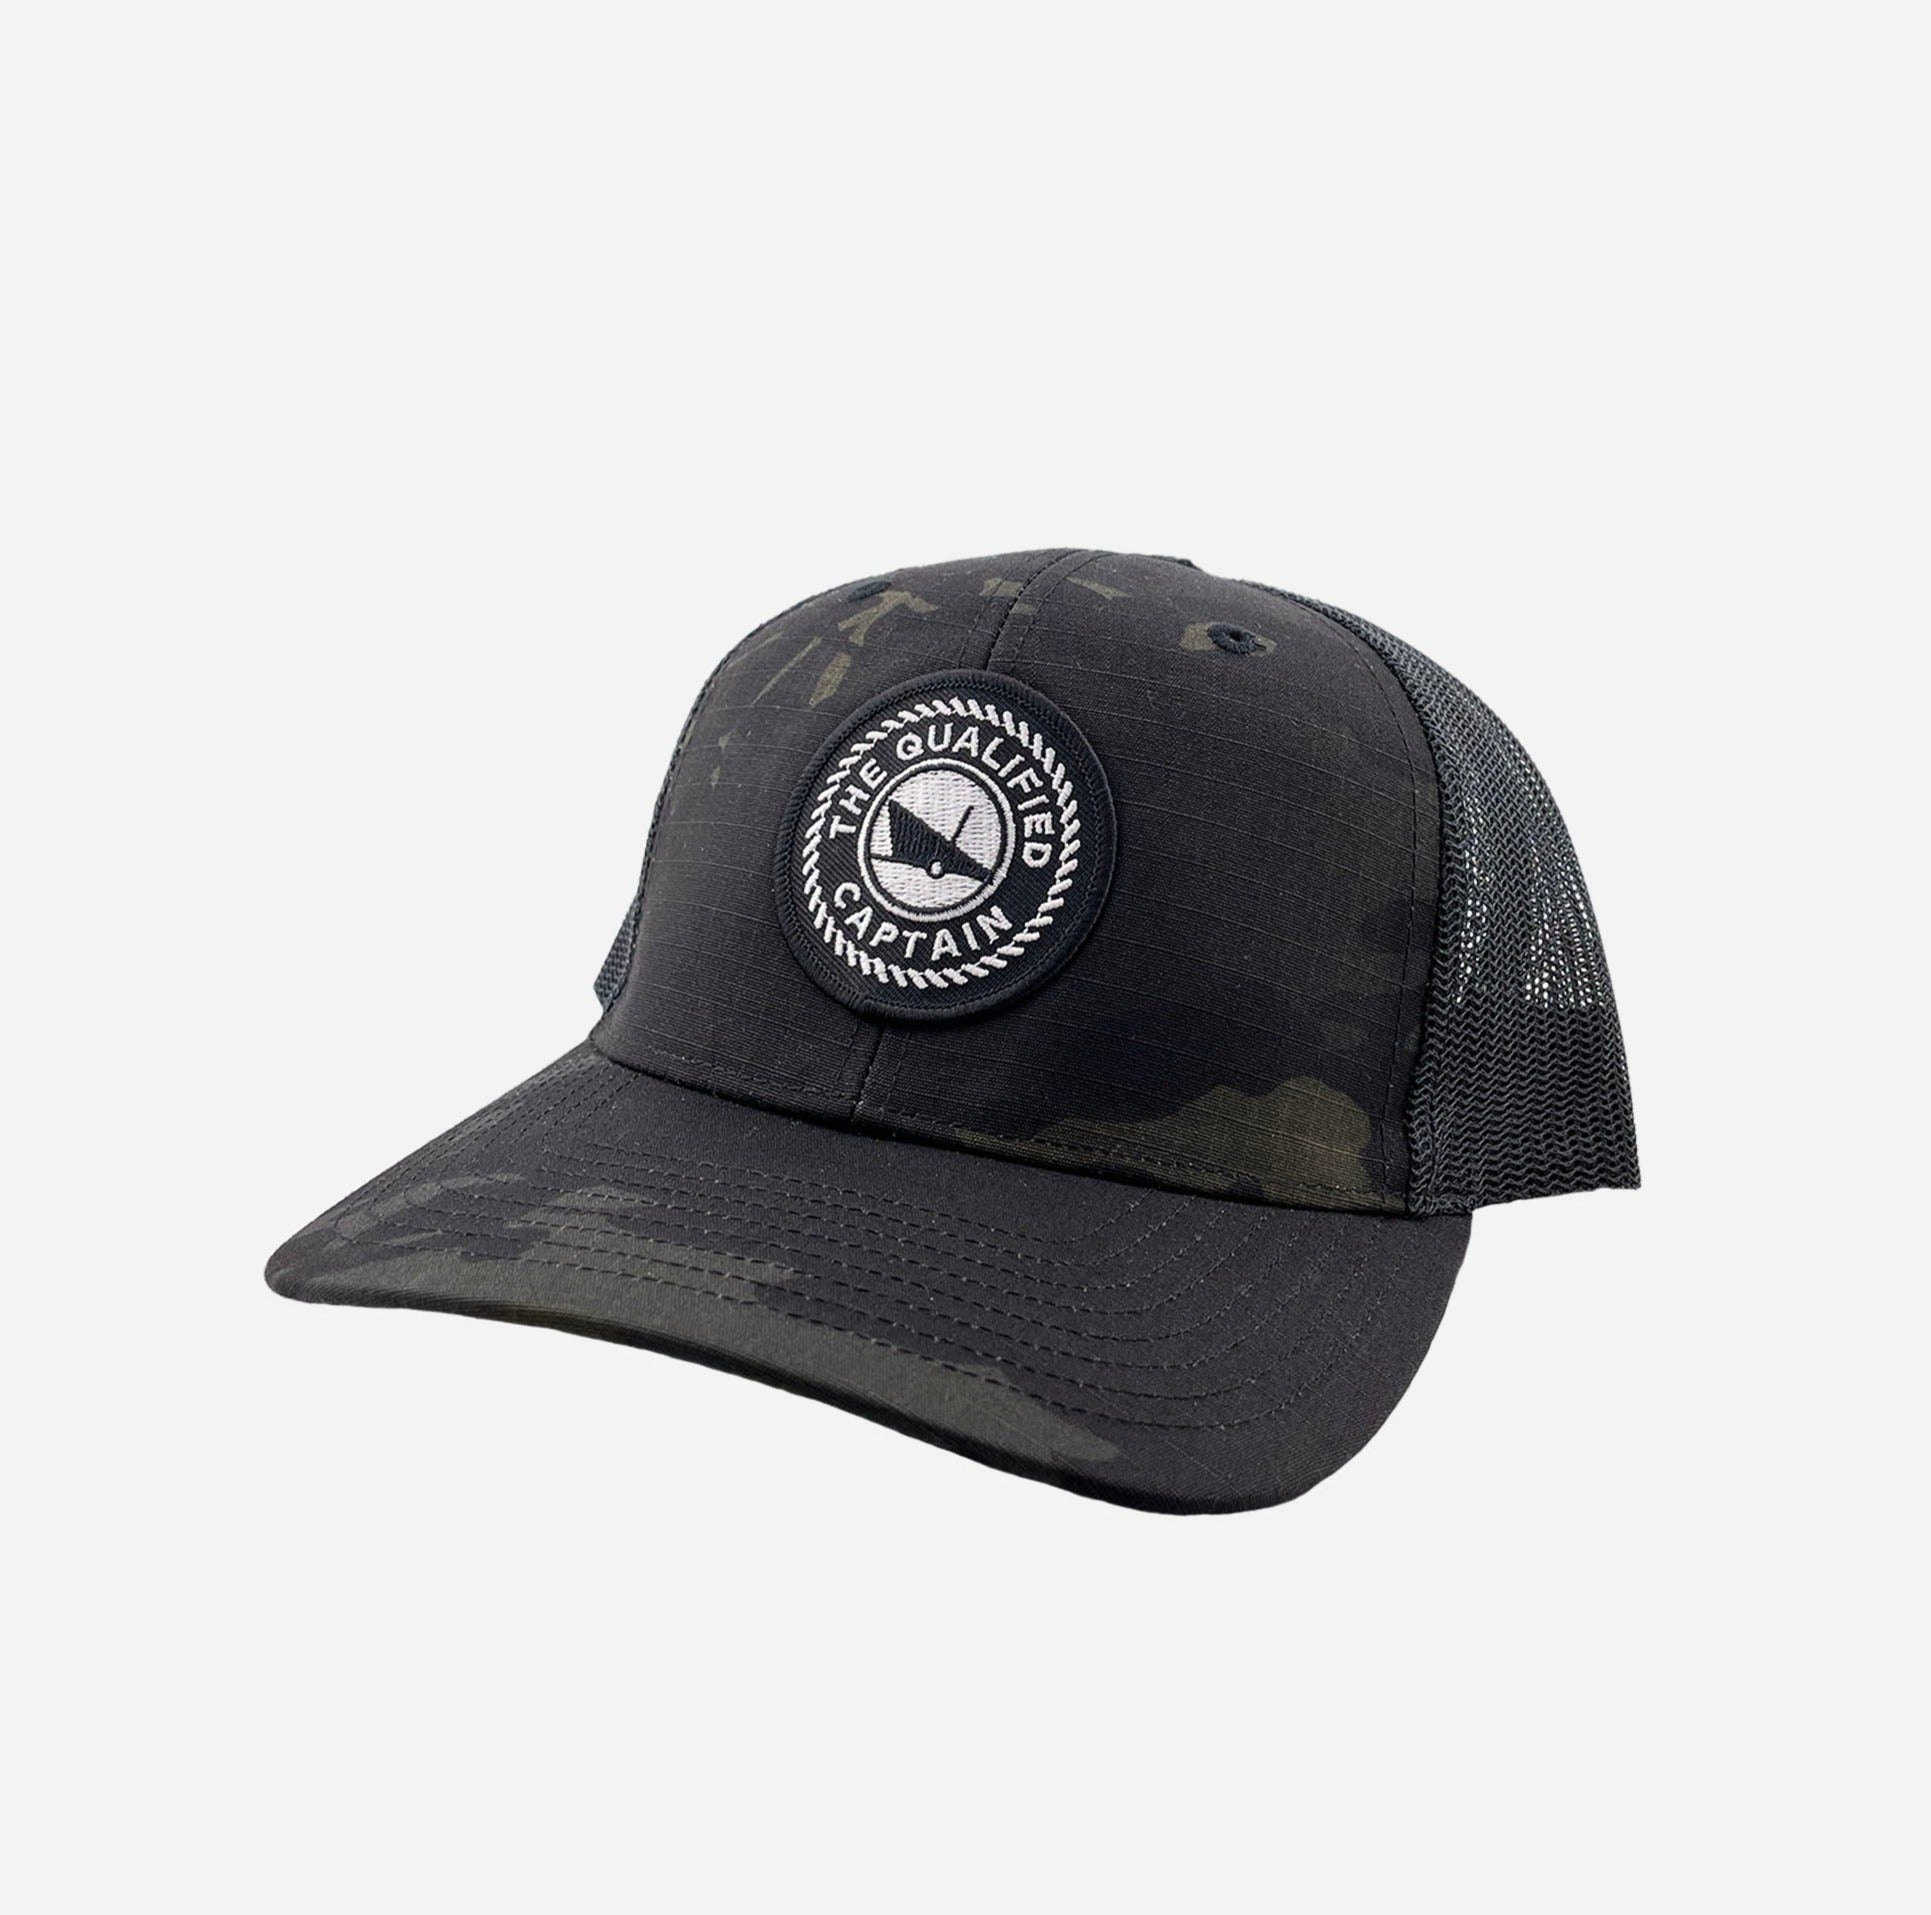 Trucker Hats – The Qualified Captain™